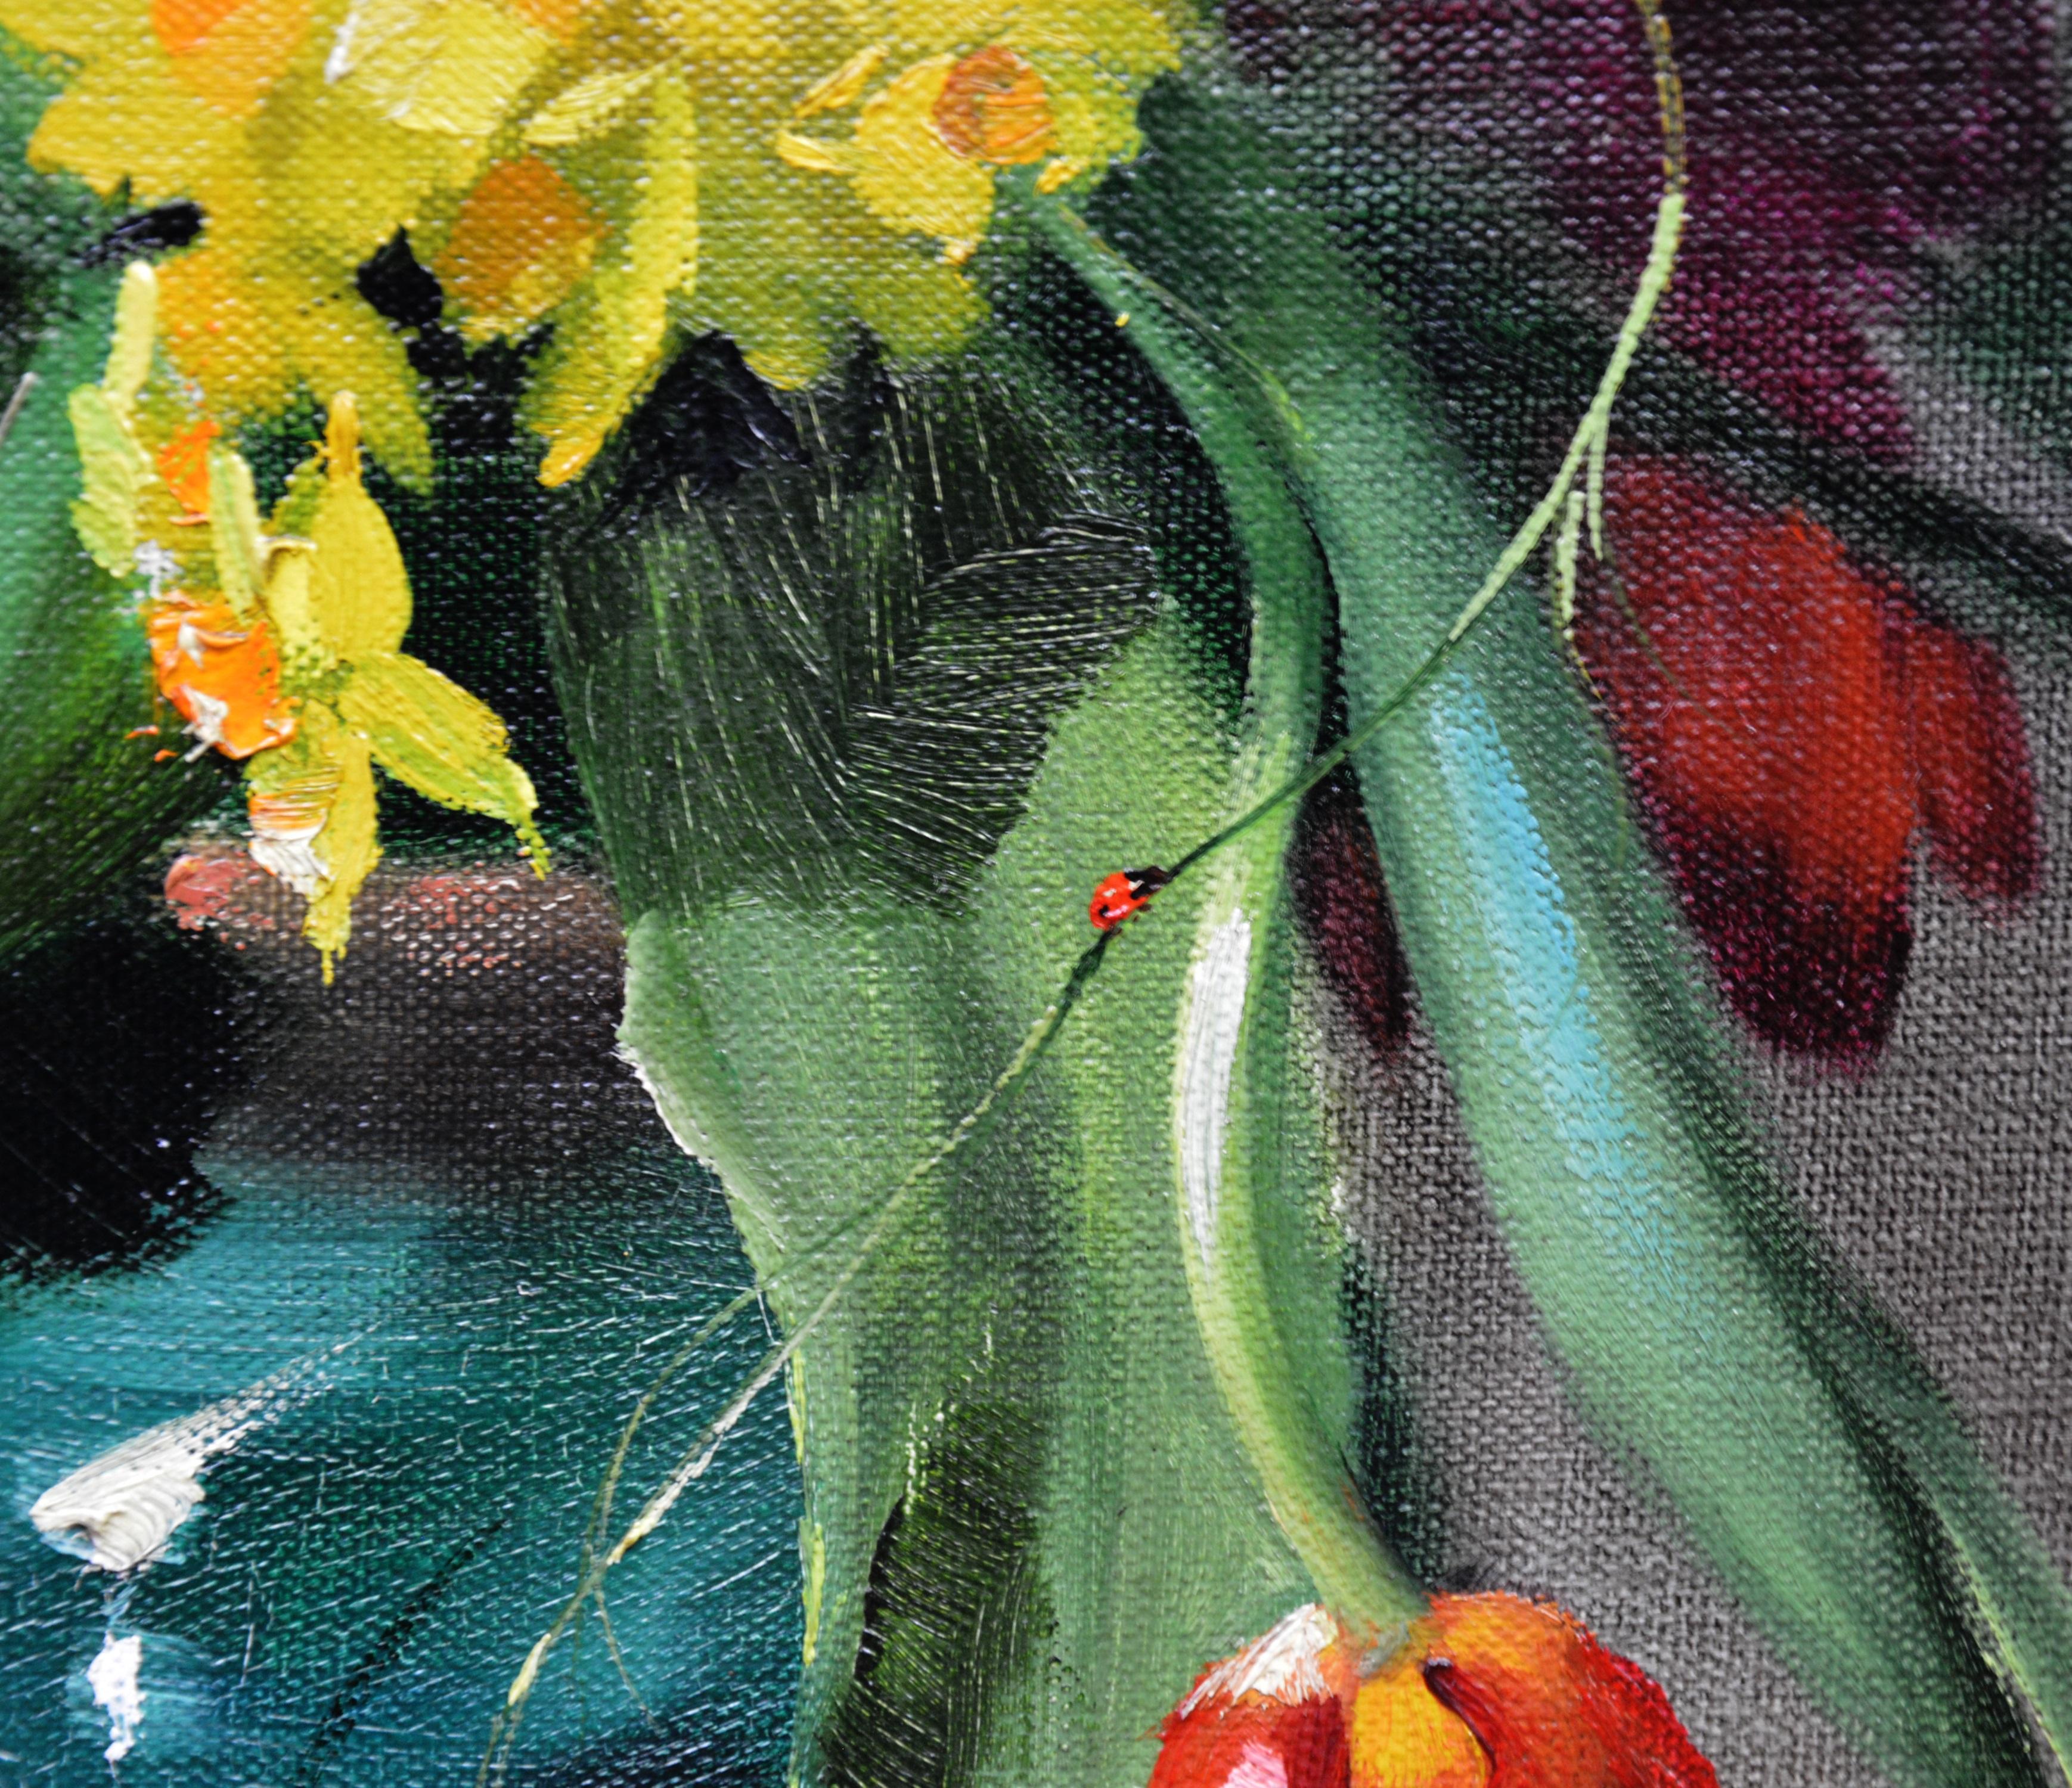 Tulips & Daffodils - Floral Still Life Oil Painting of Spring Flowers 2